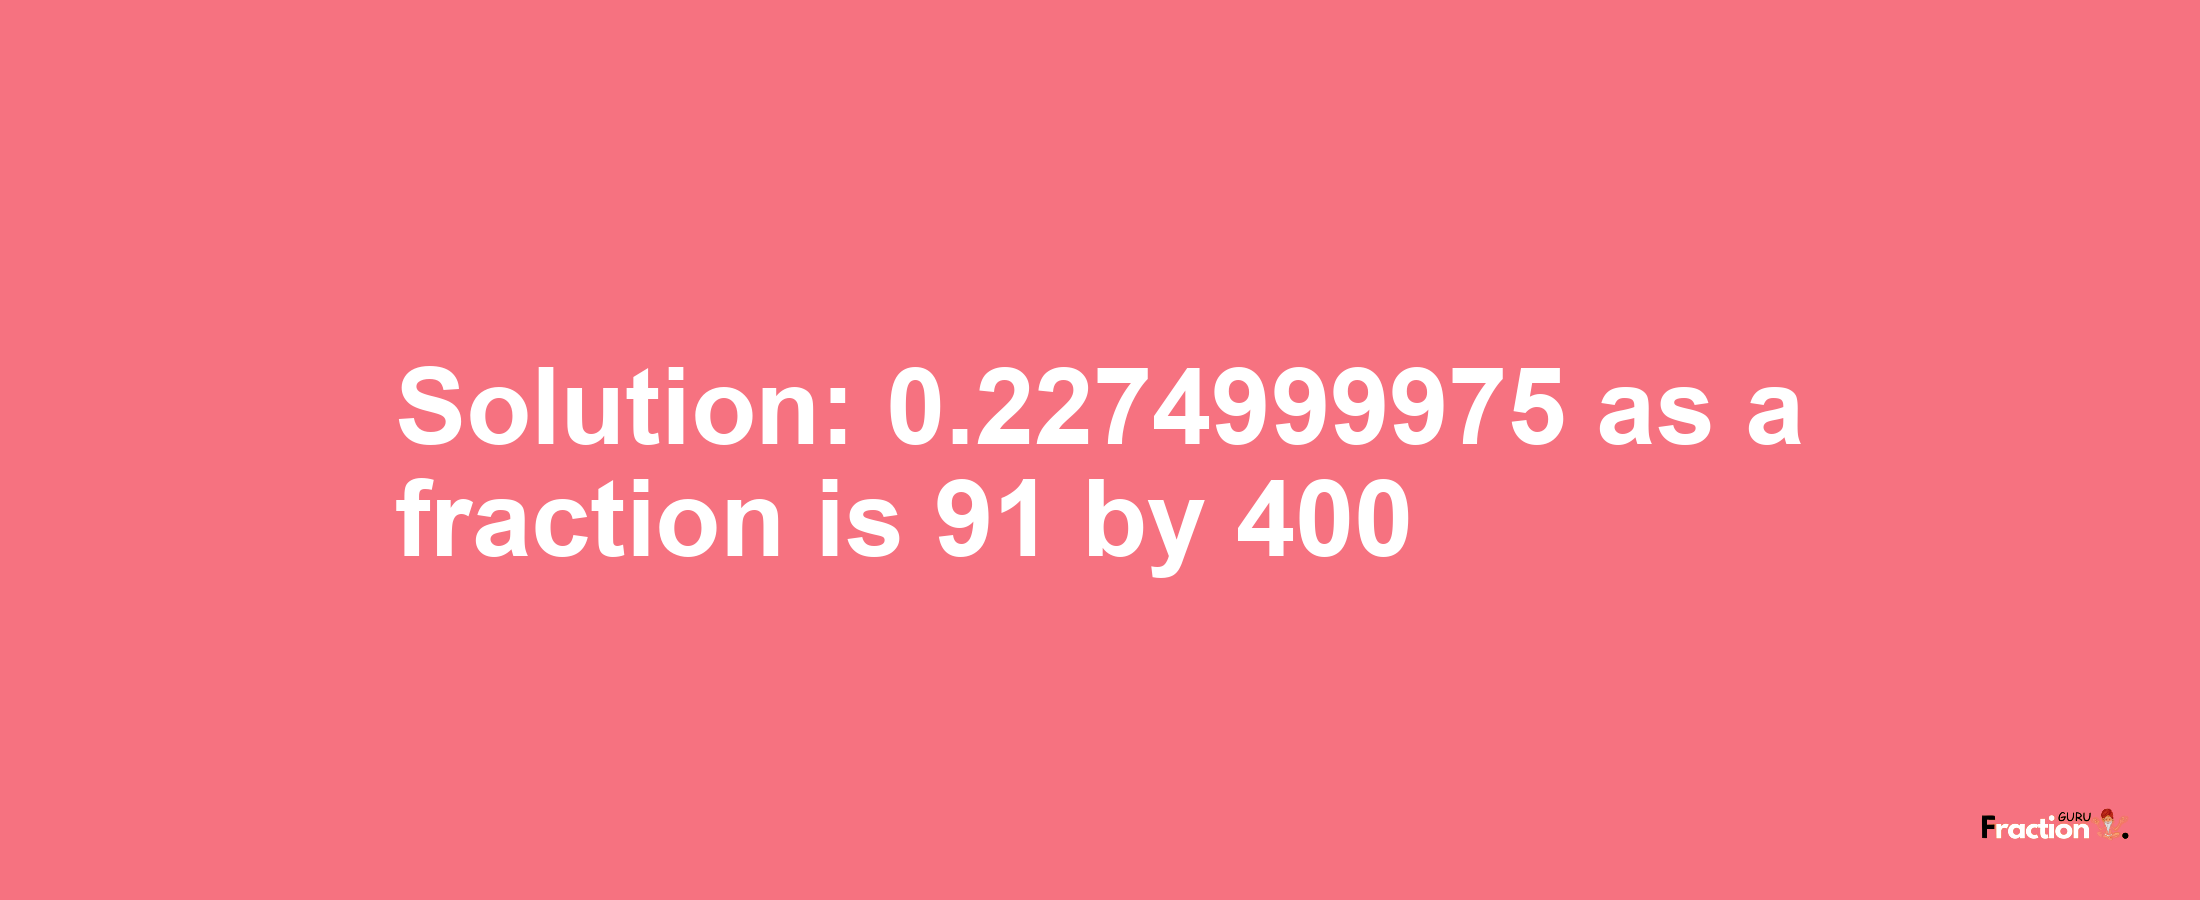 Solution:0.2274999975 as a fraction is 91/400